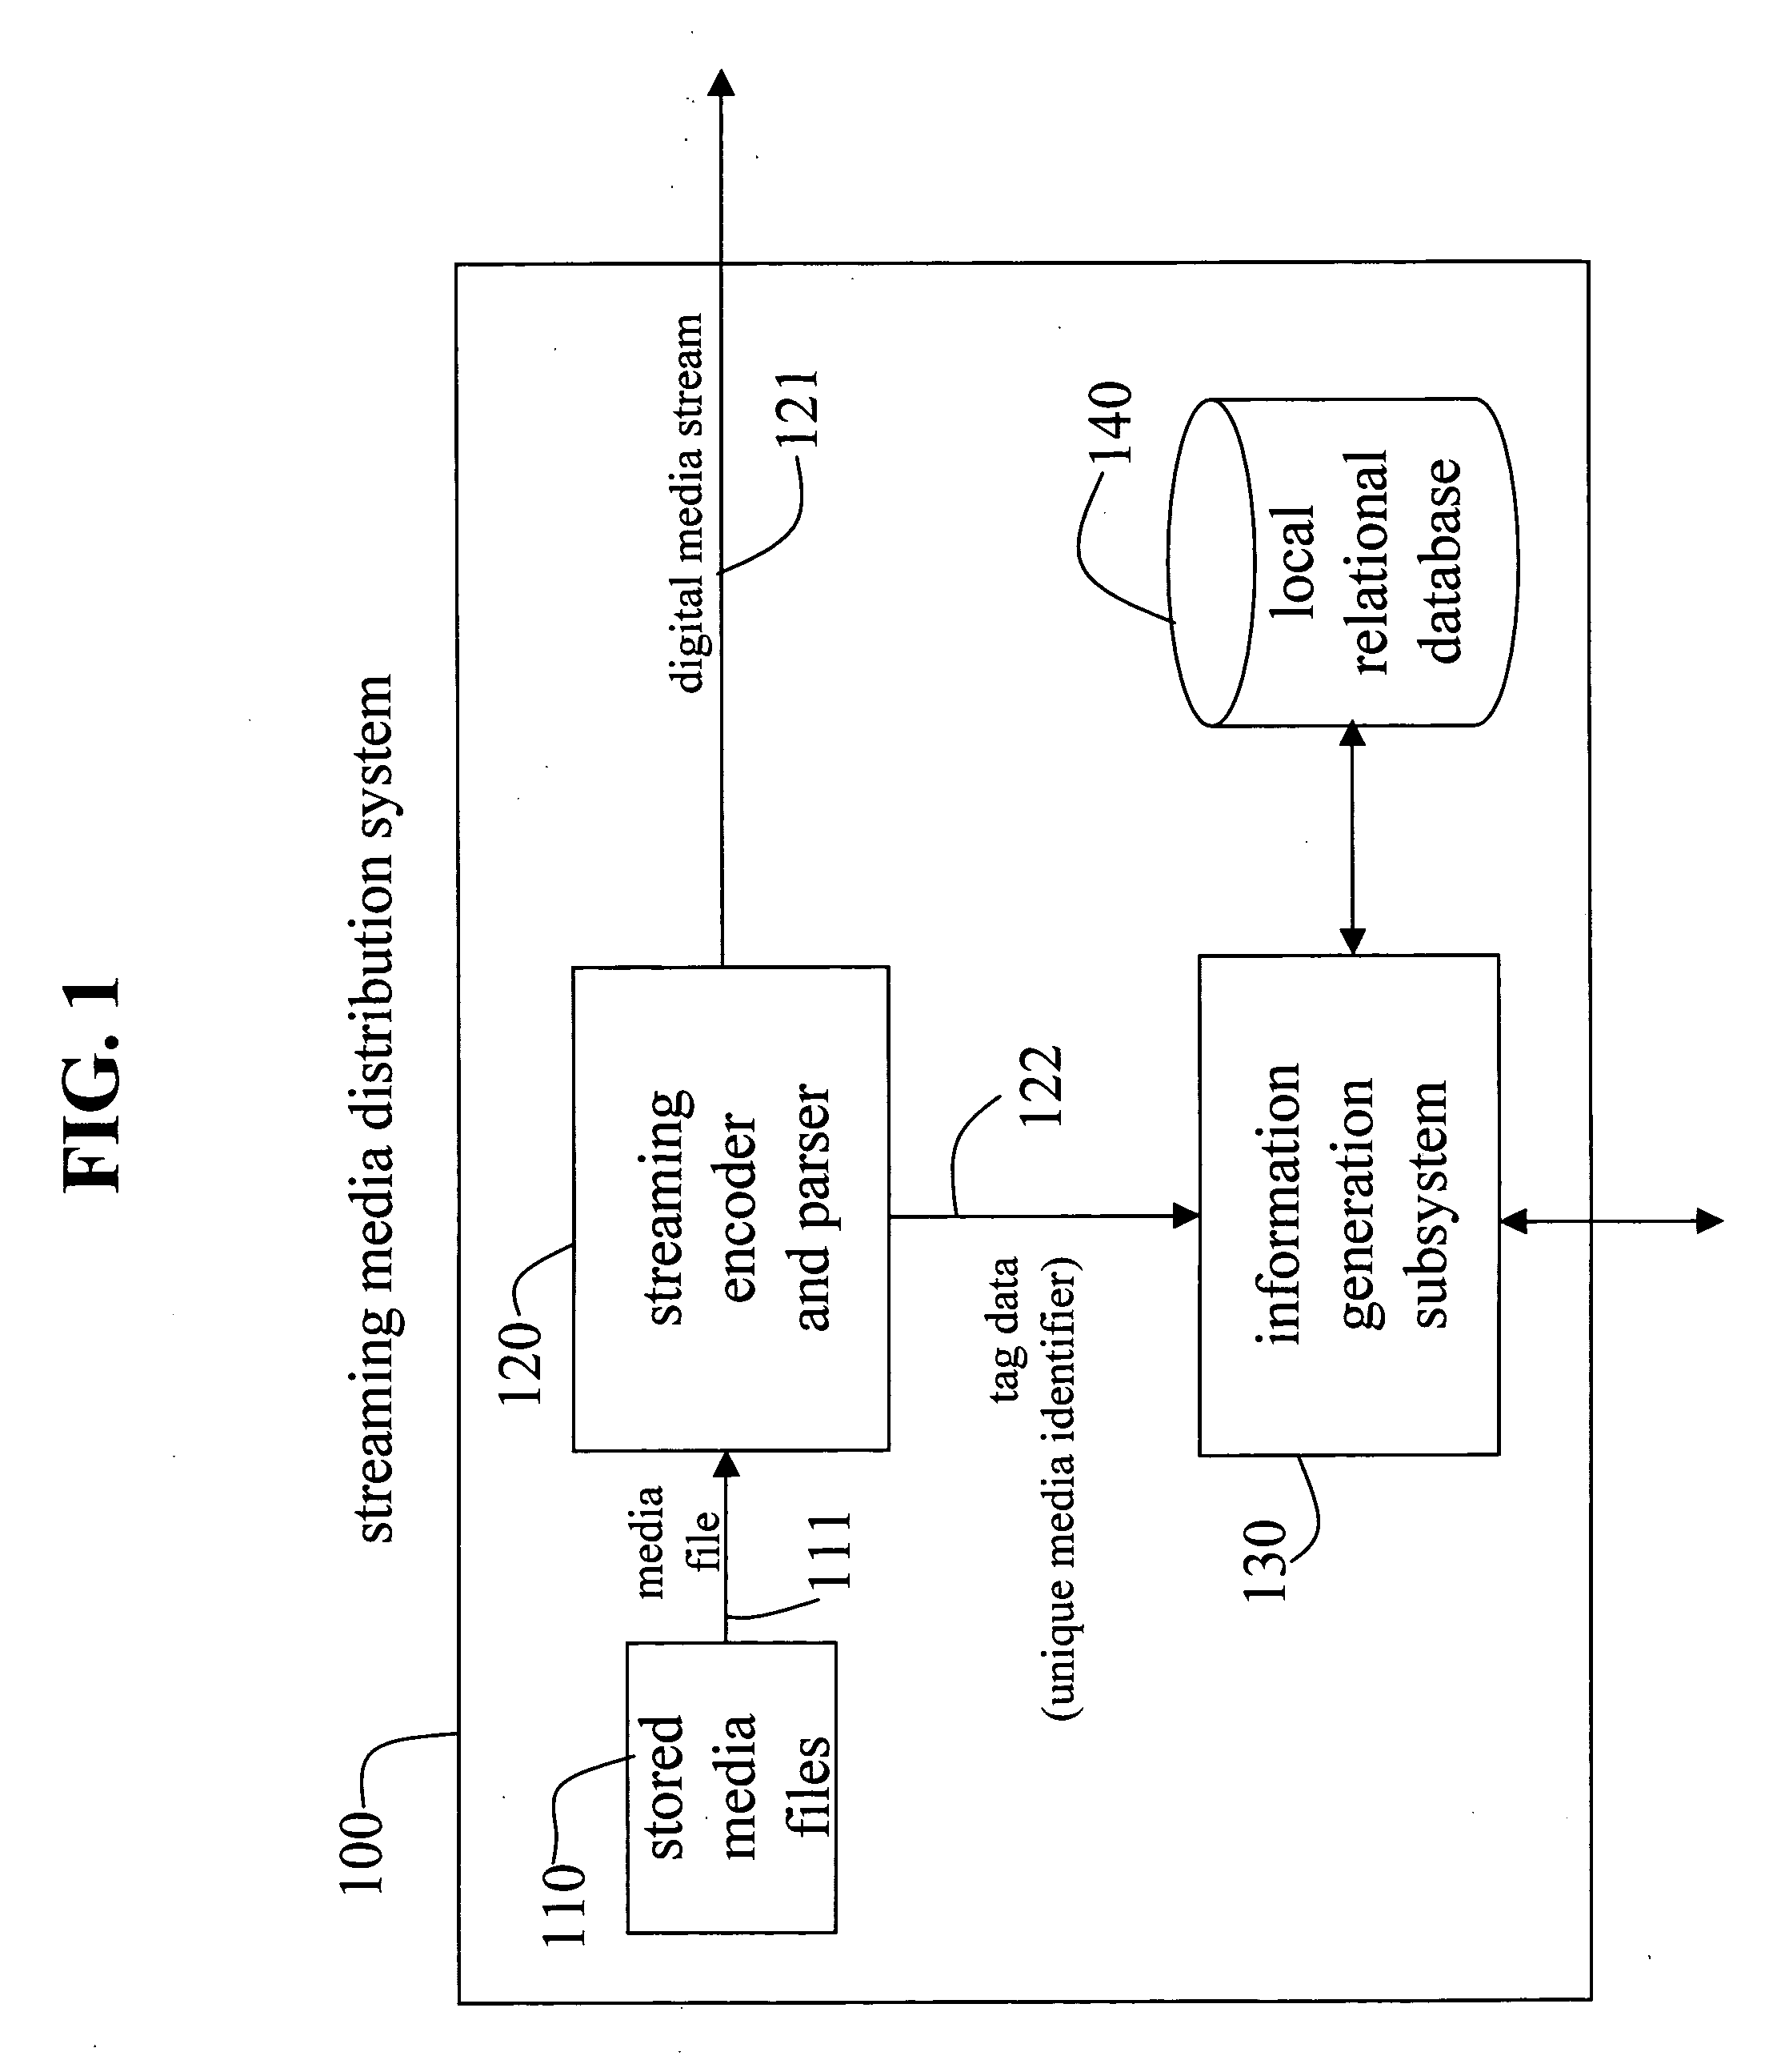 Systems and methods to provide internet search/play media services